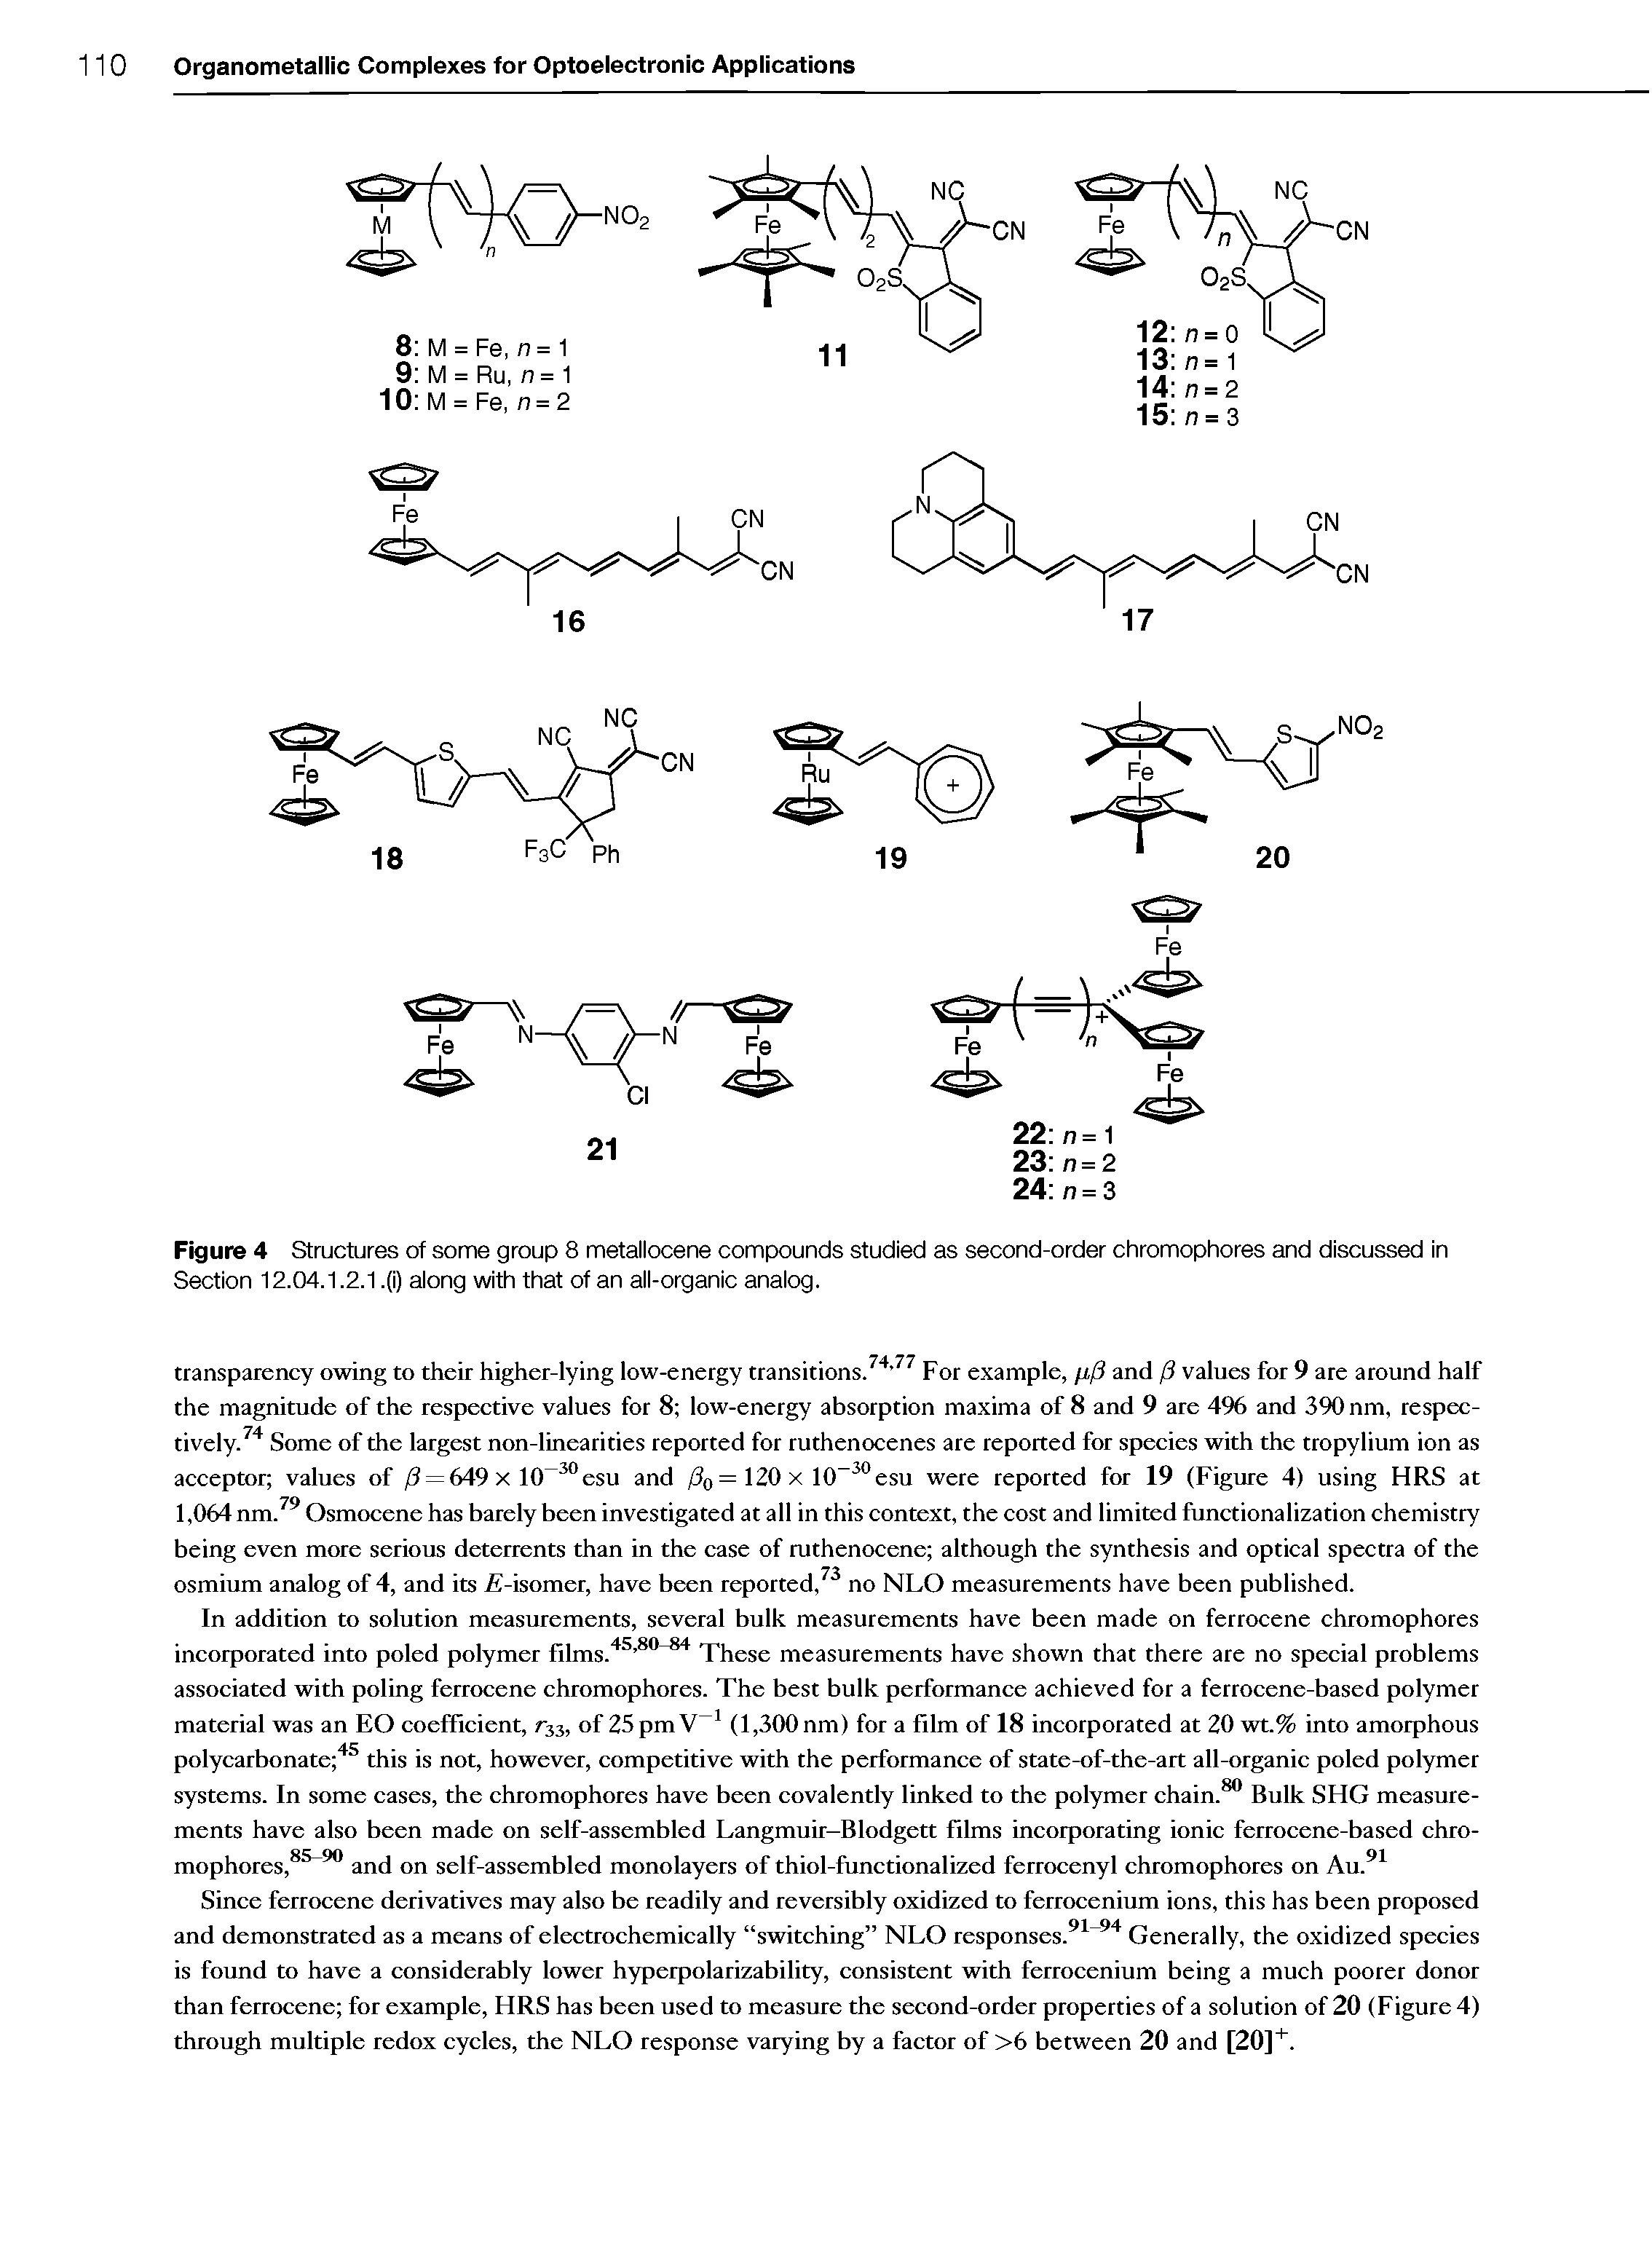 Figure 4 Structures of some group 8 metallocene compounds studied as second-order chromophores and discussed In Section 12.04.1.2.1. (I) along with that of an all-organic analog.